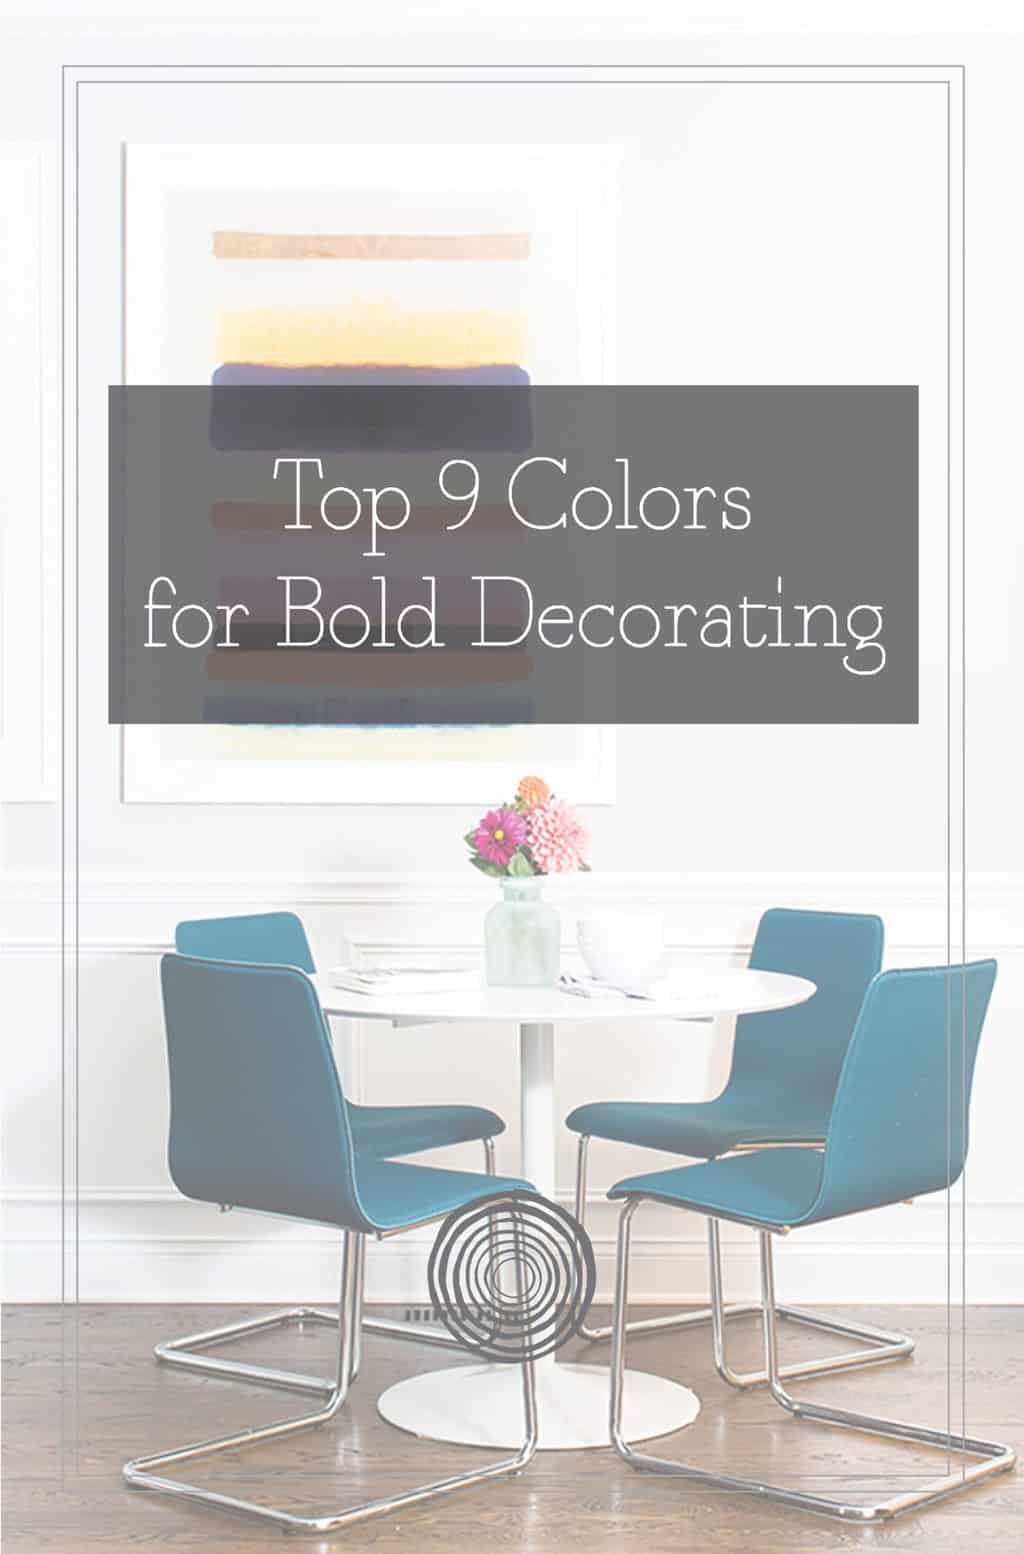 Top 9 Colors for Bold Decorating PDF